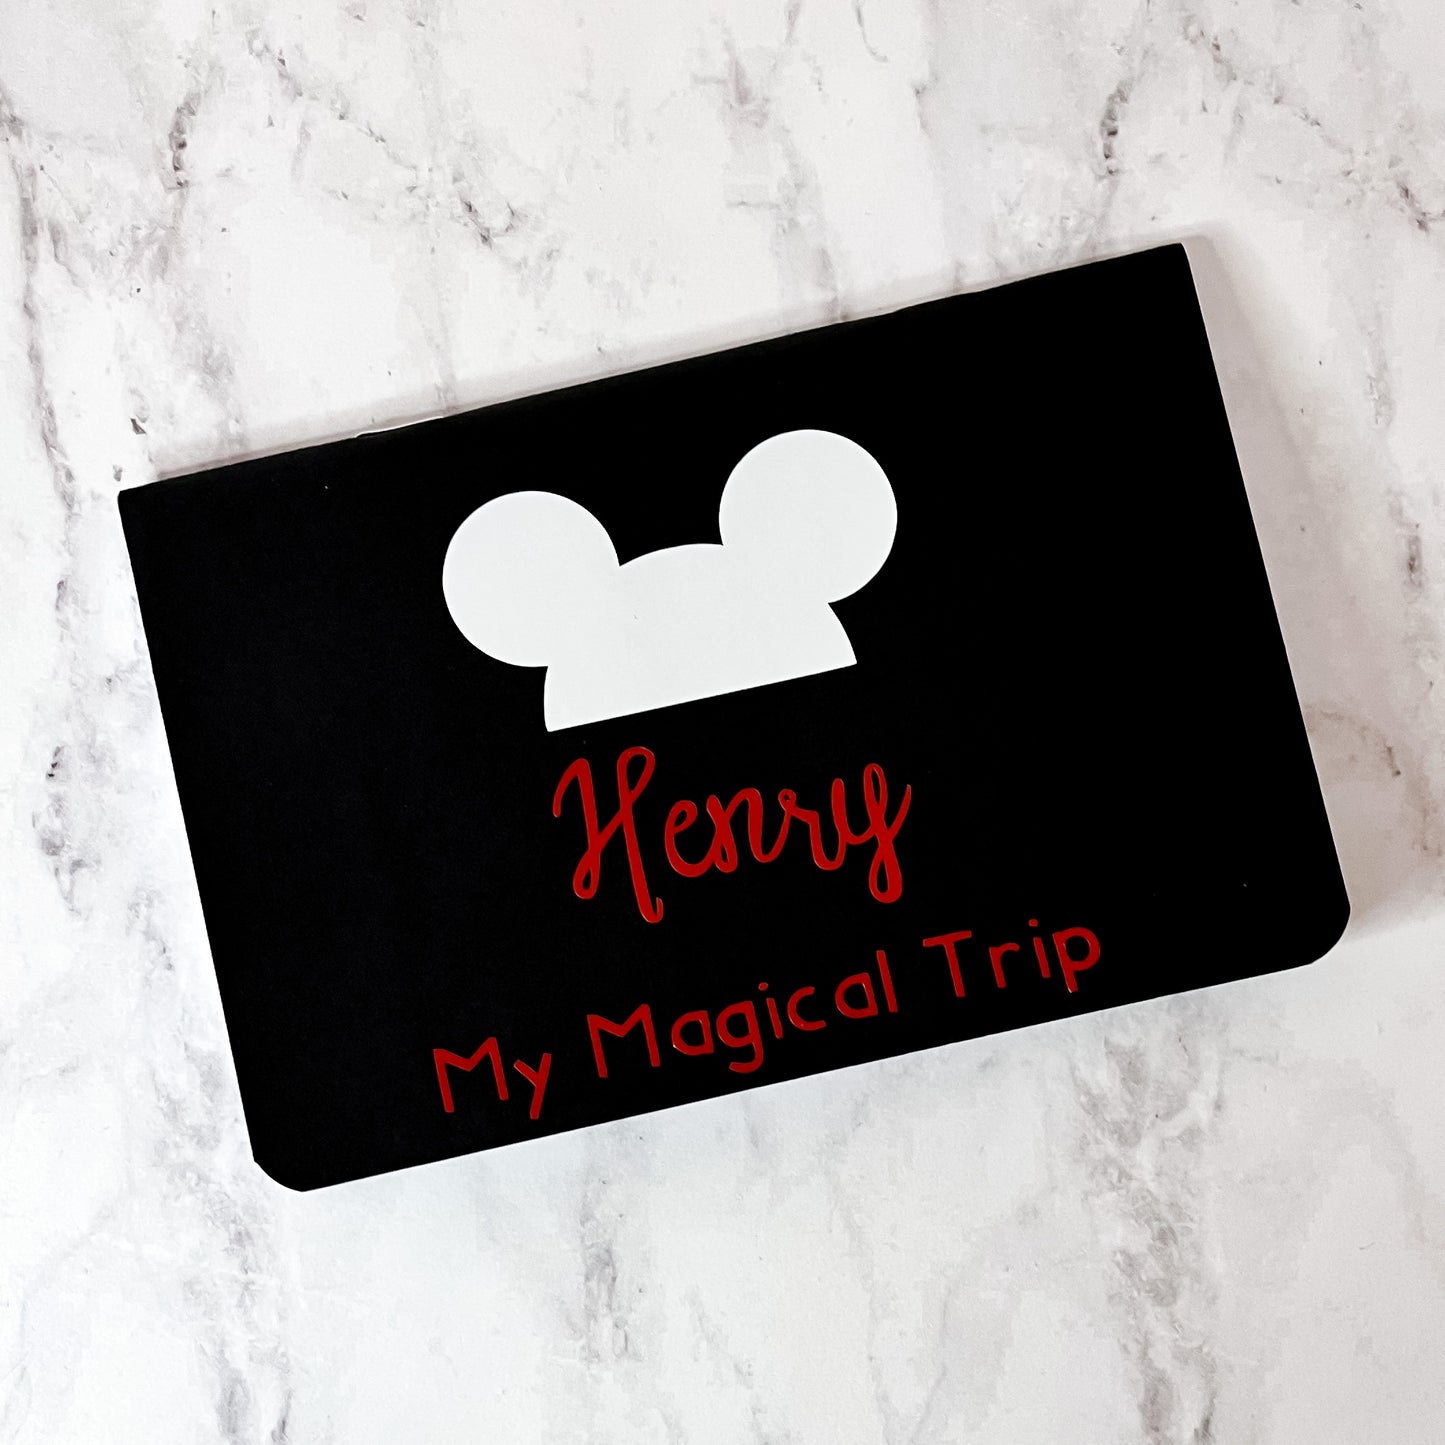 Mickey and Minnie Ears Personalized Autograph Booklet